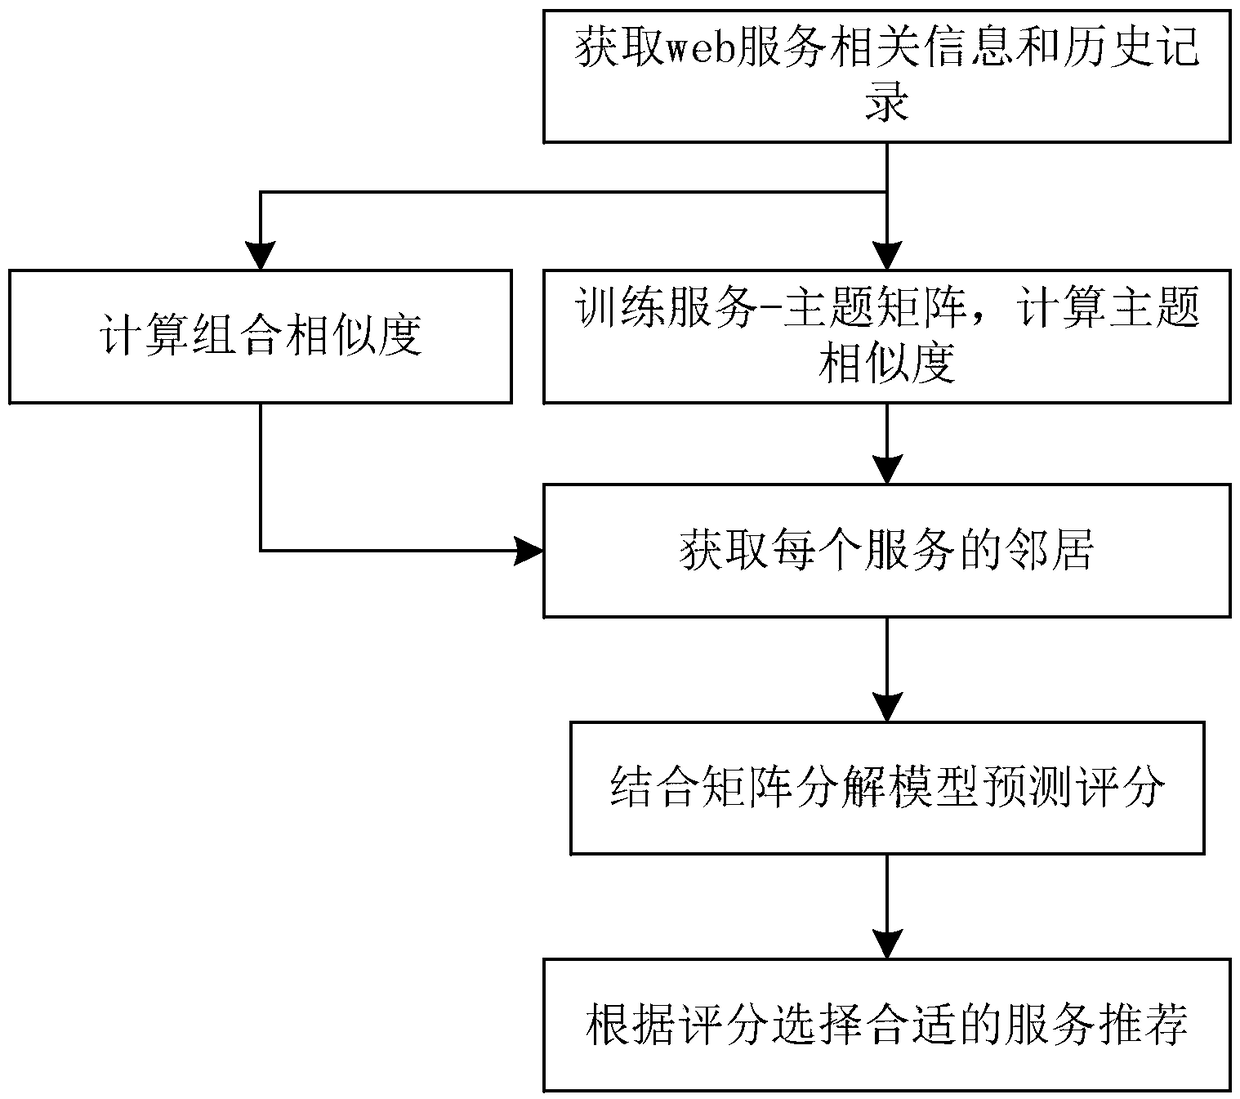 Web service recommendation method based on theme and service combination information